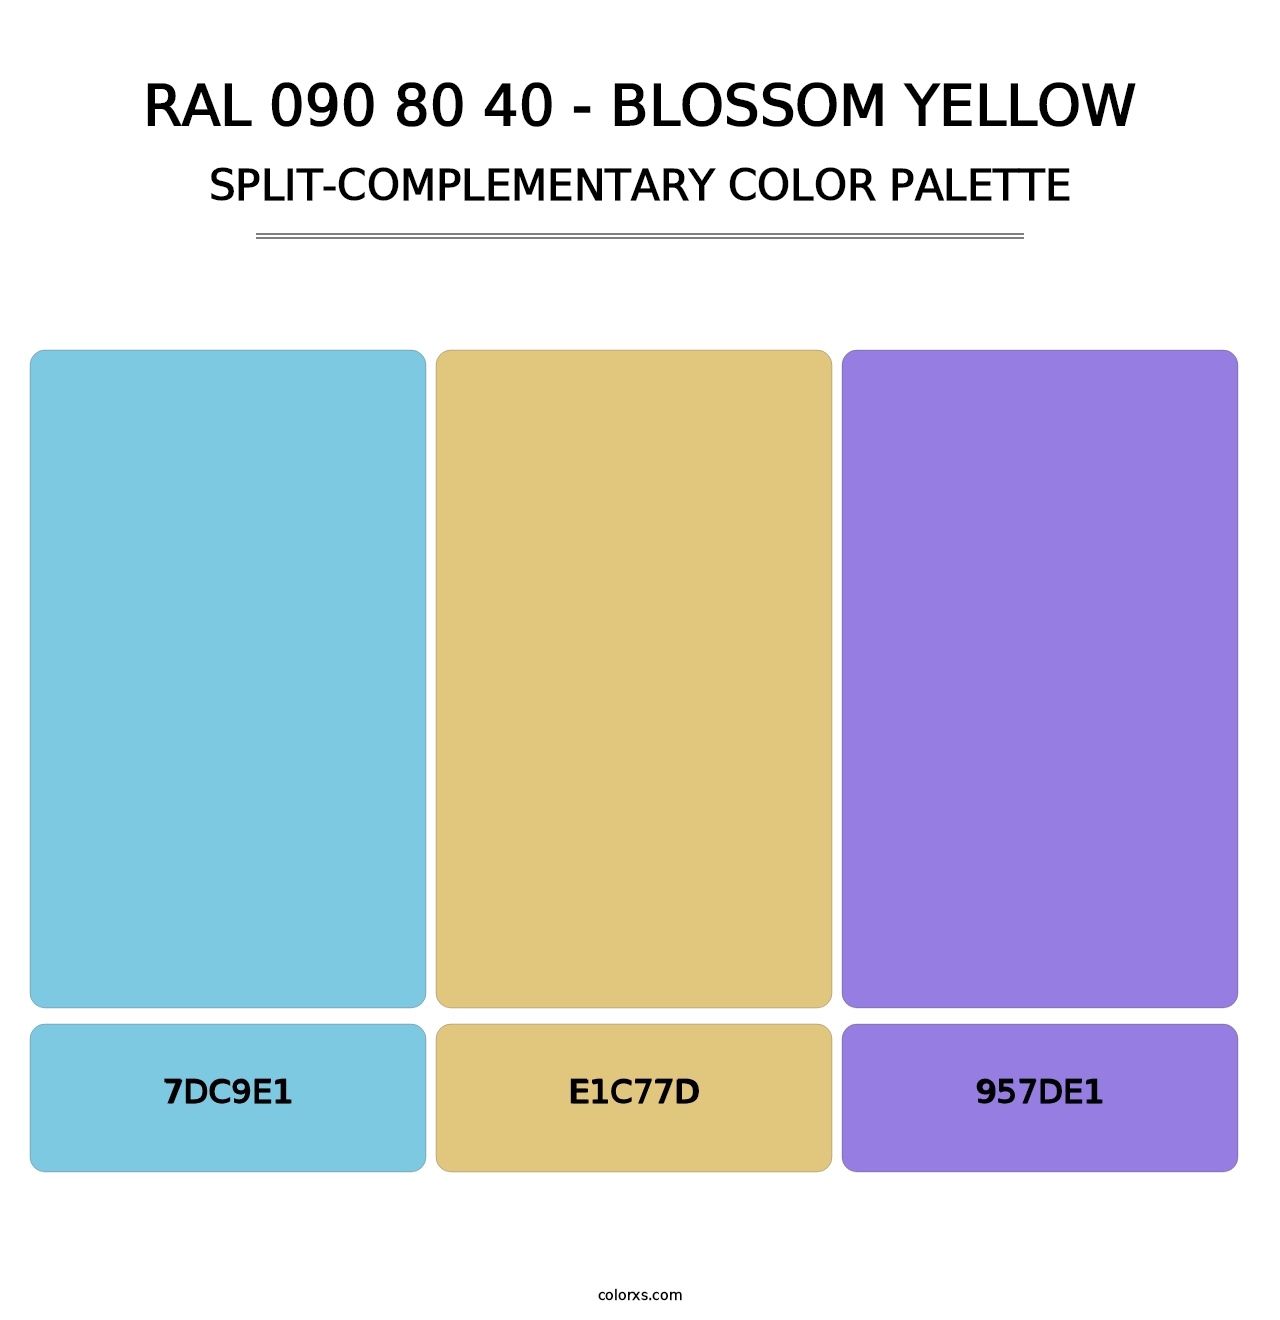 RAL 090 80 40 - Blossom Yellow - Split-Complementary Color Palette